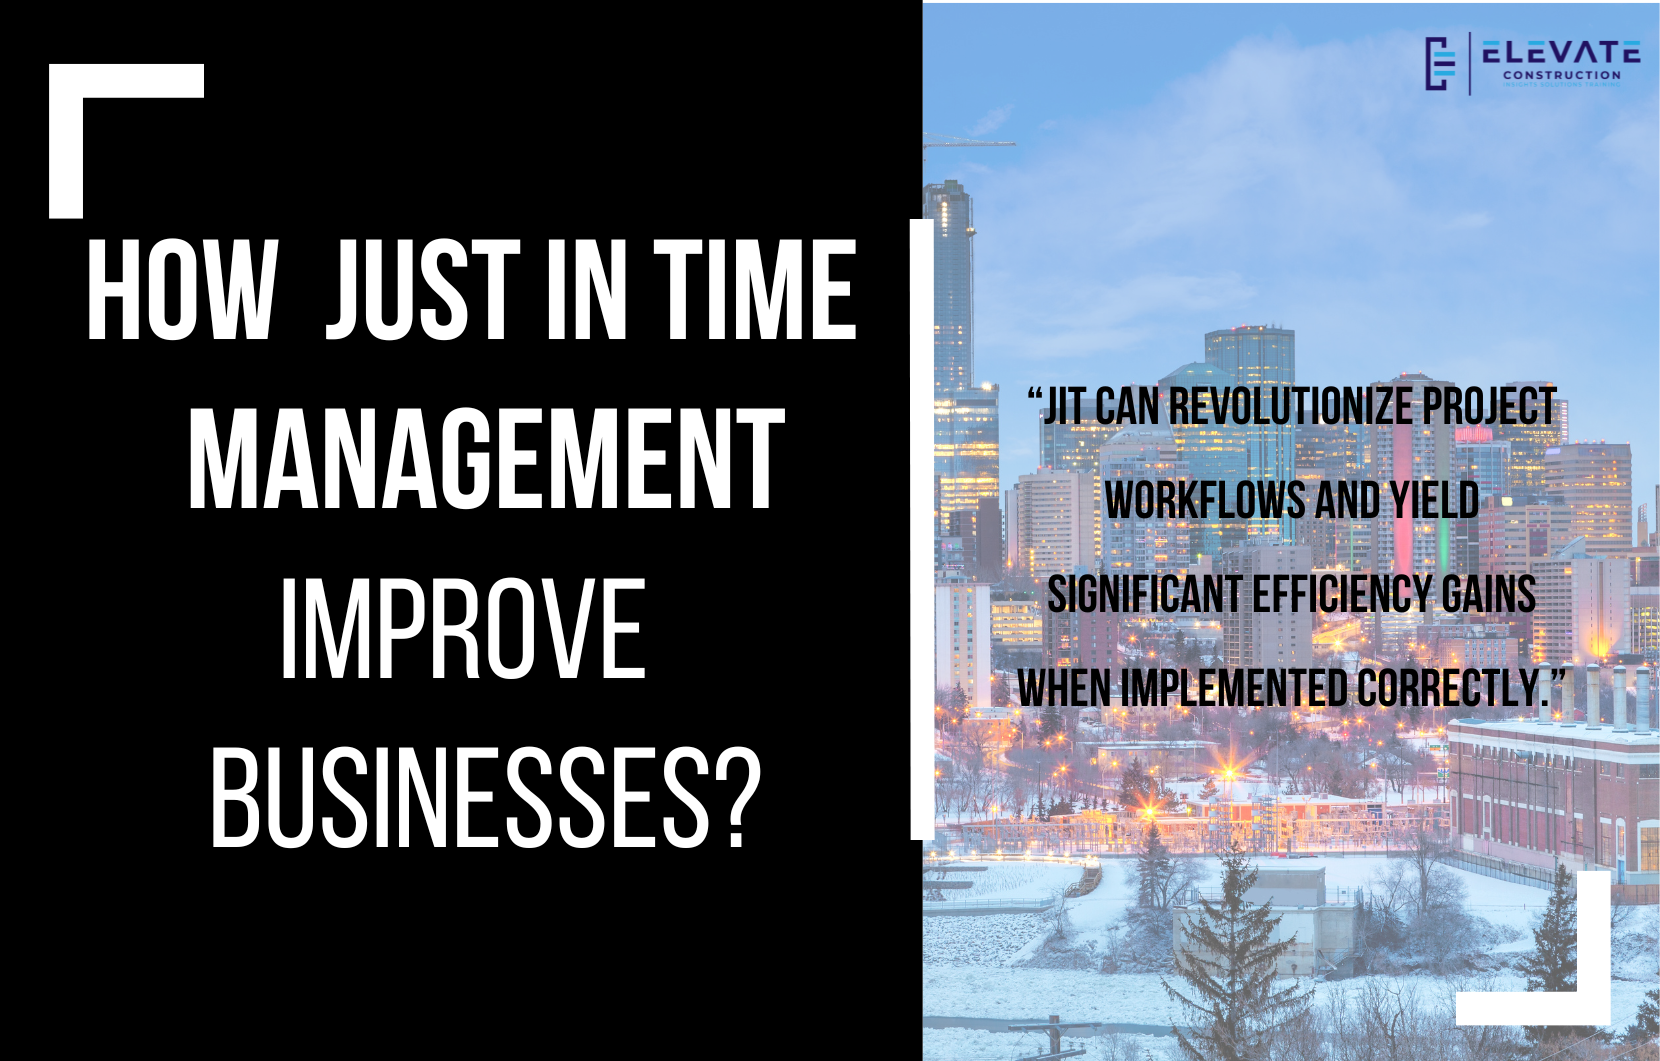 How Does Just-In-Time Inventory Management Improve Businesses?